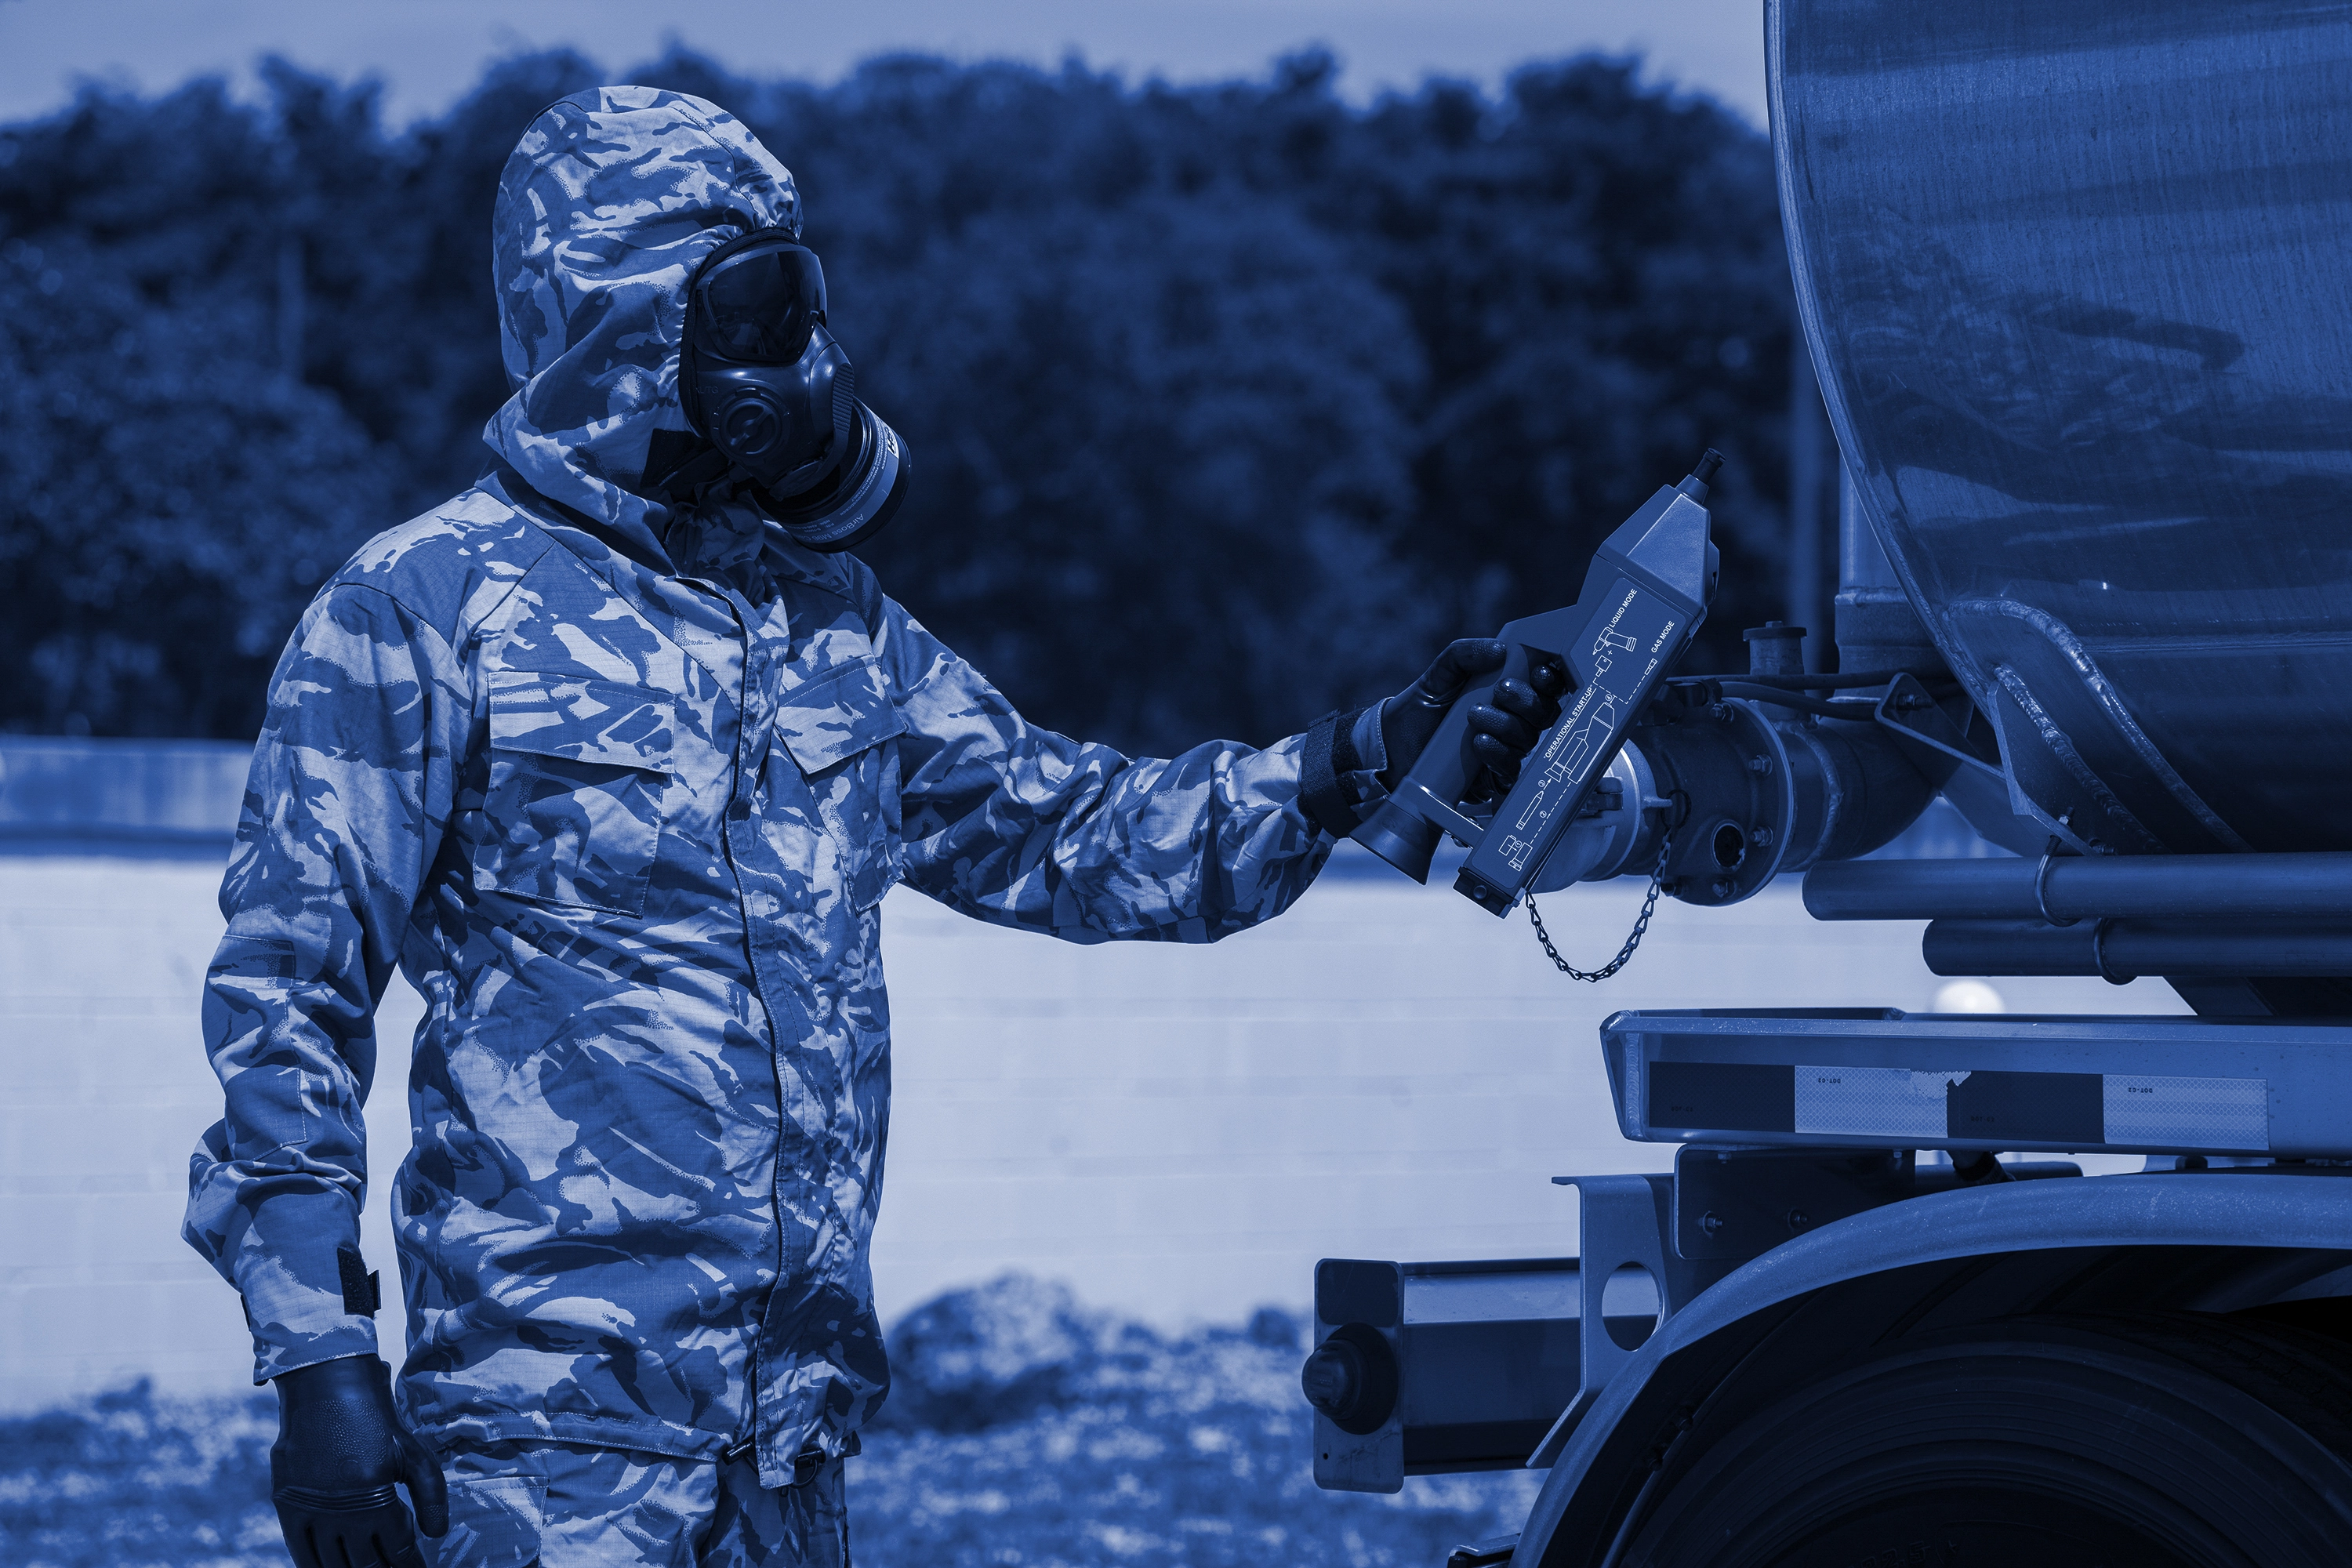 13/04/2023 - The combat specialists in contaminated environments